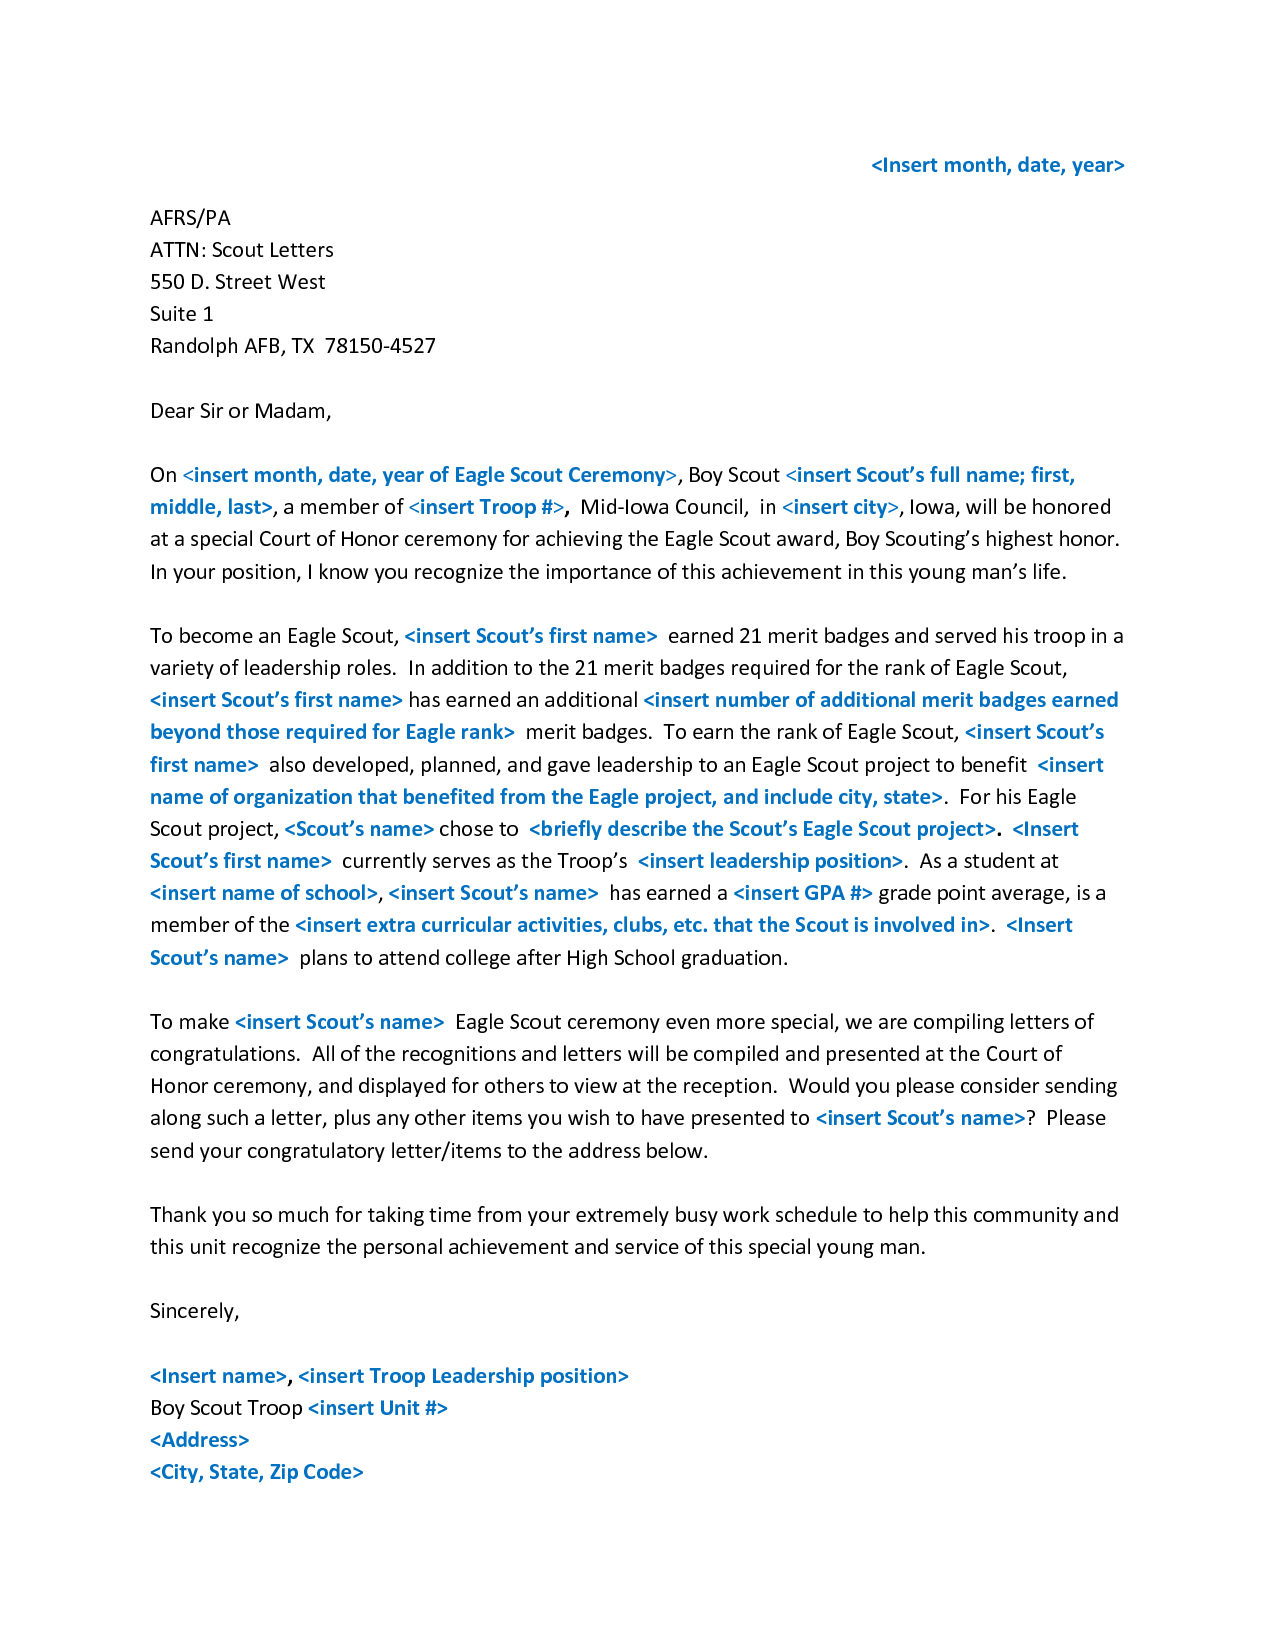 Eagle Scout Letter Of Recommendation Yahoo Image Search within proportions 1275 X 1650